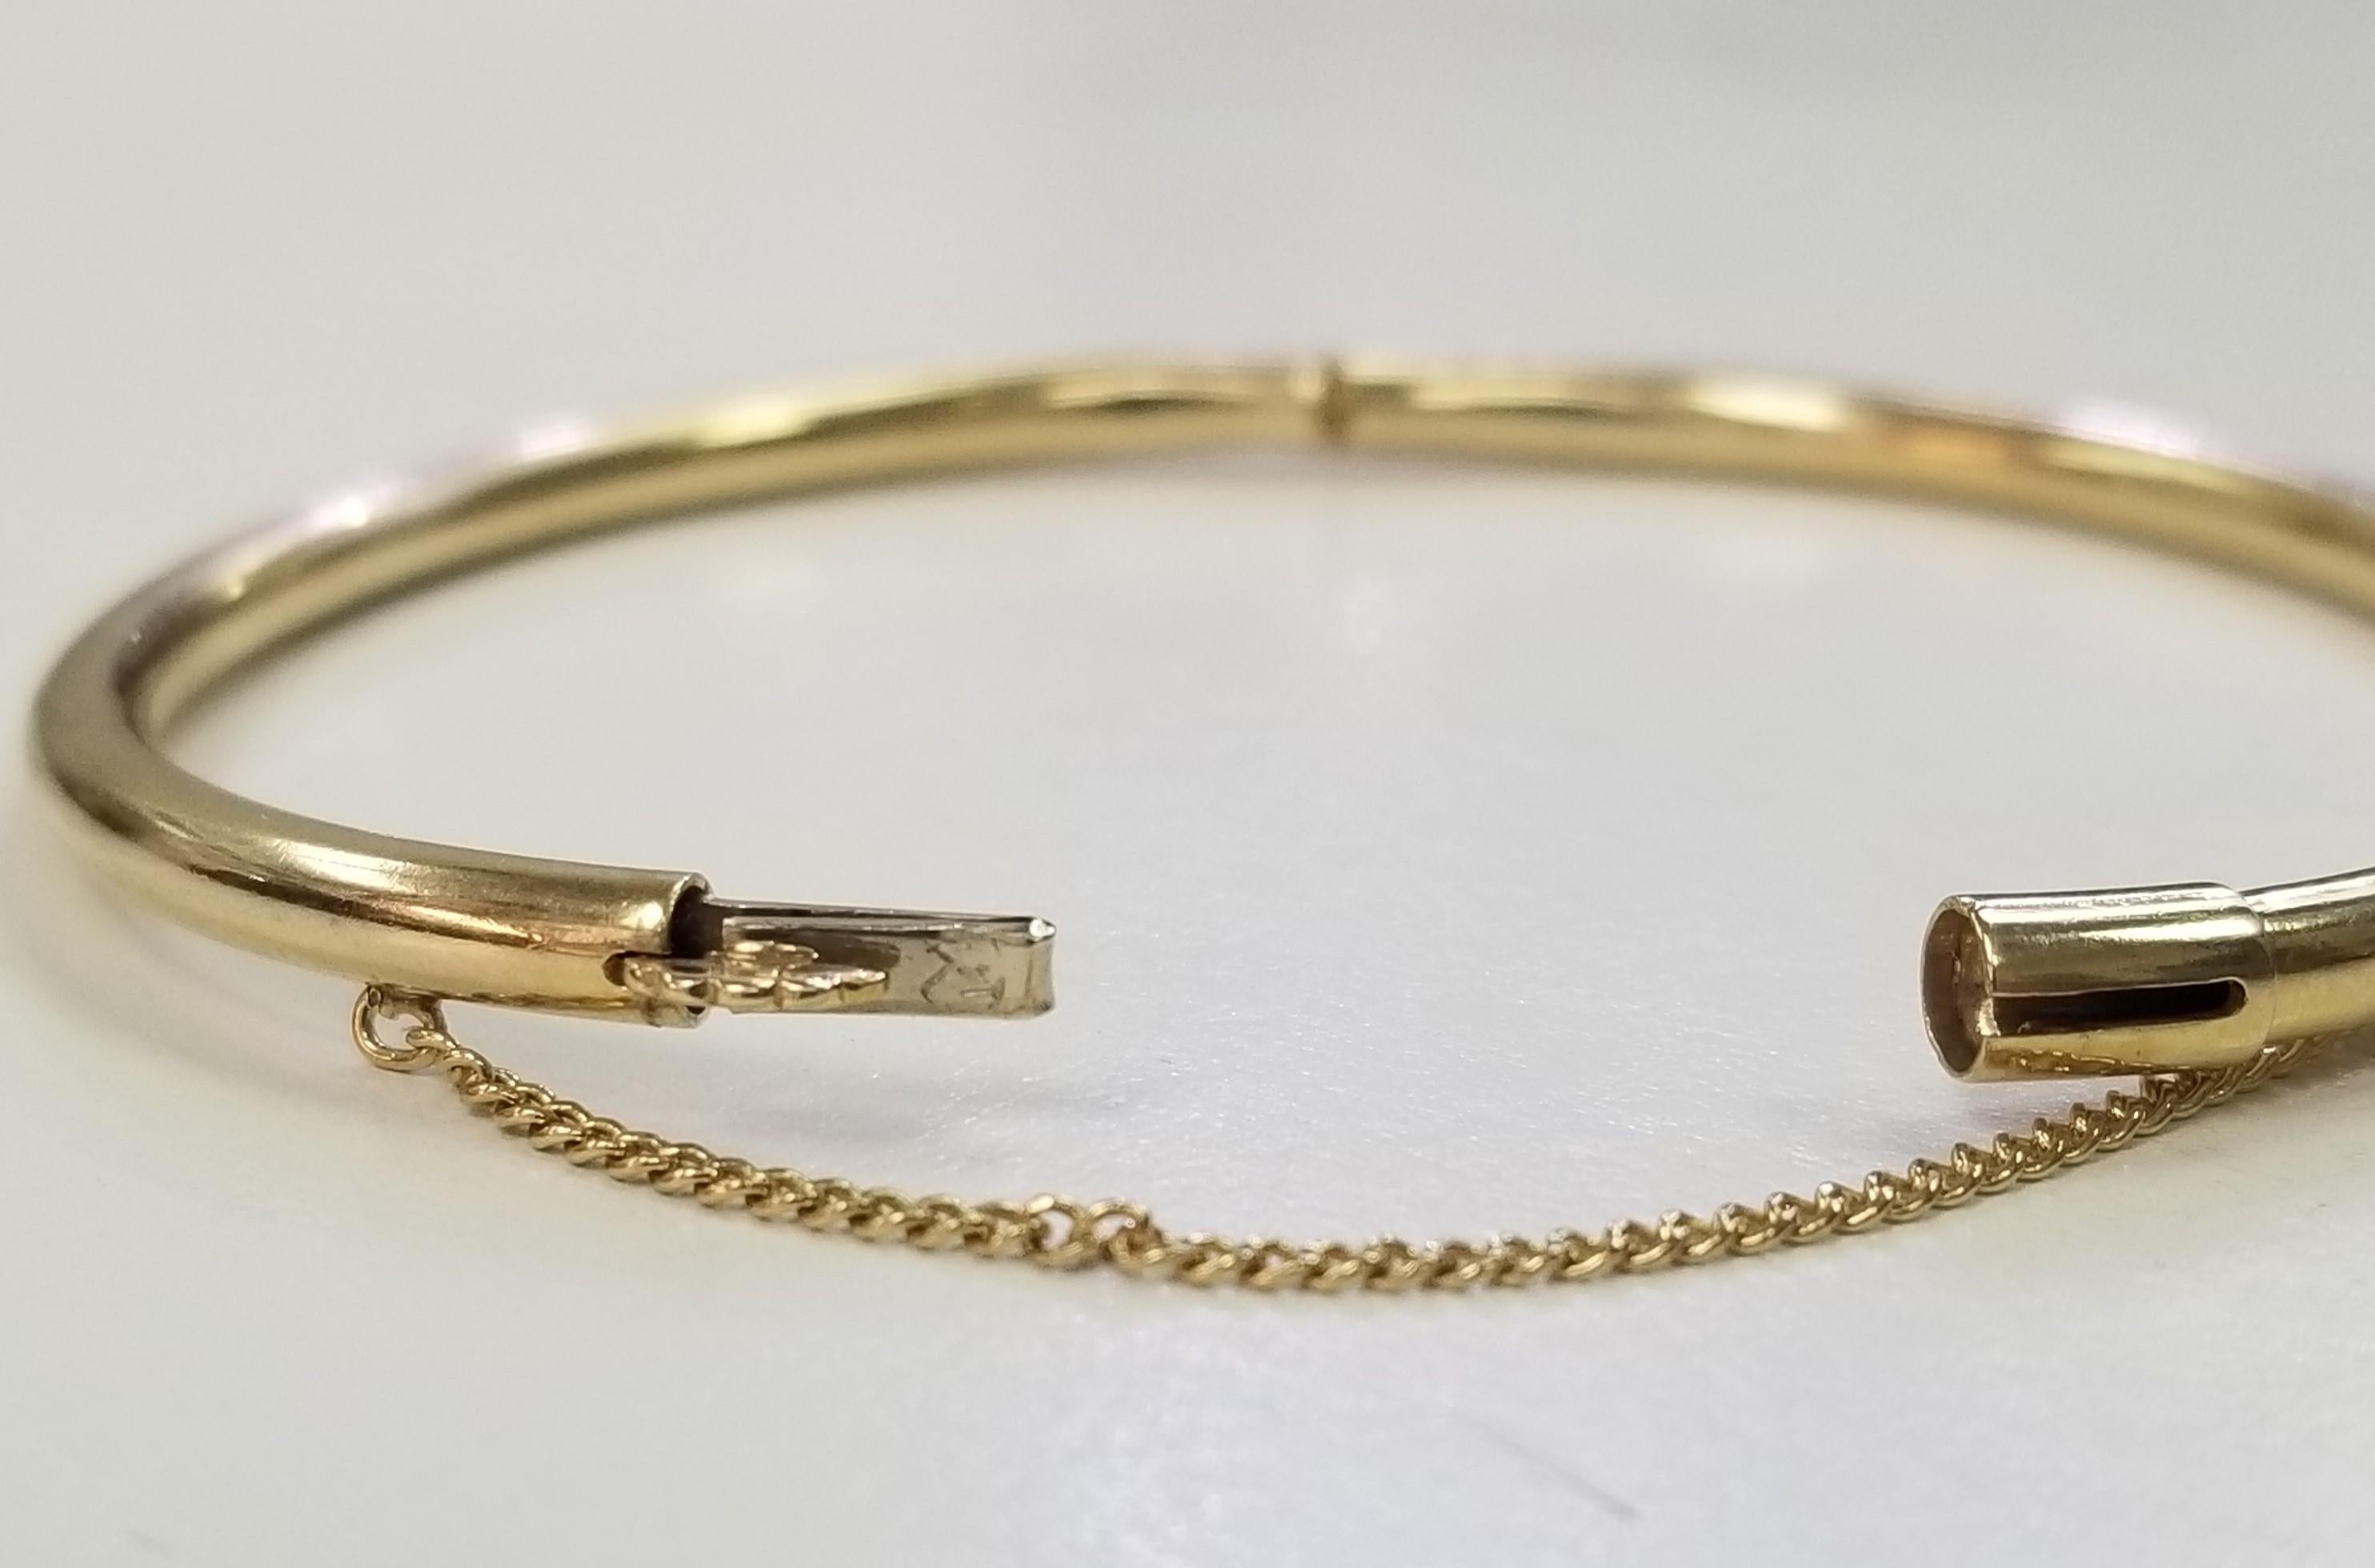 14k Yellow Gold  3.5mm Hollow Bangle Bracelet  with Safety Chain
Specifications:
    metal:  14K gold
    type: BRACELET
    width: 3.5mm
    weight: 8.10 gr
